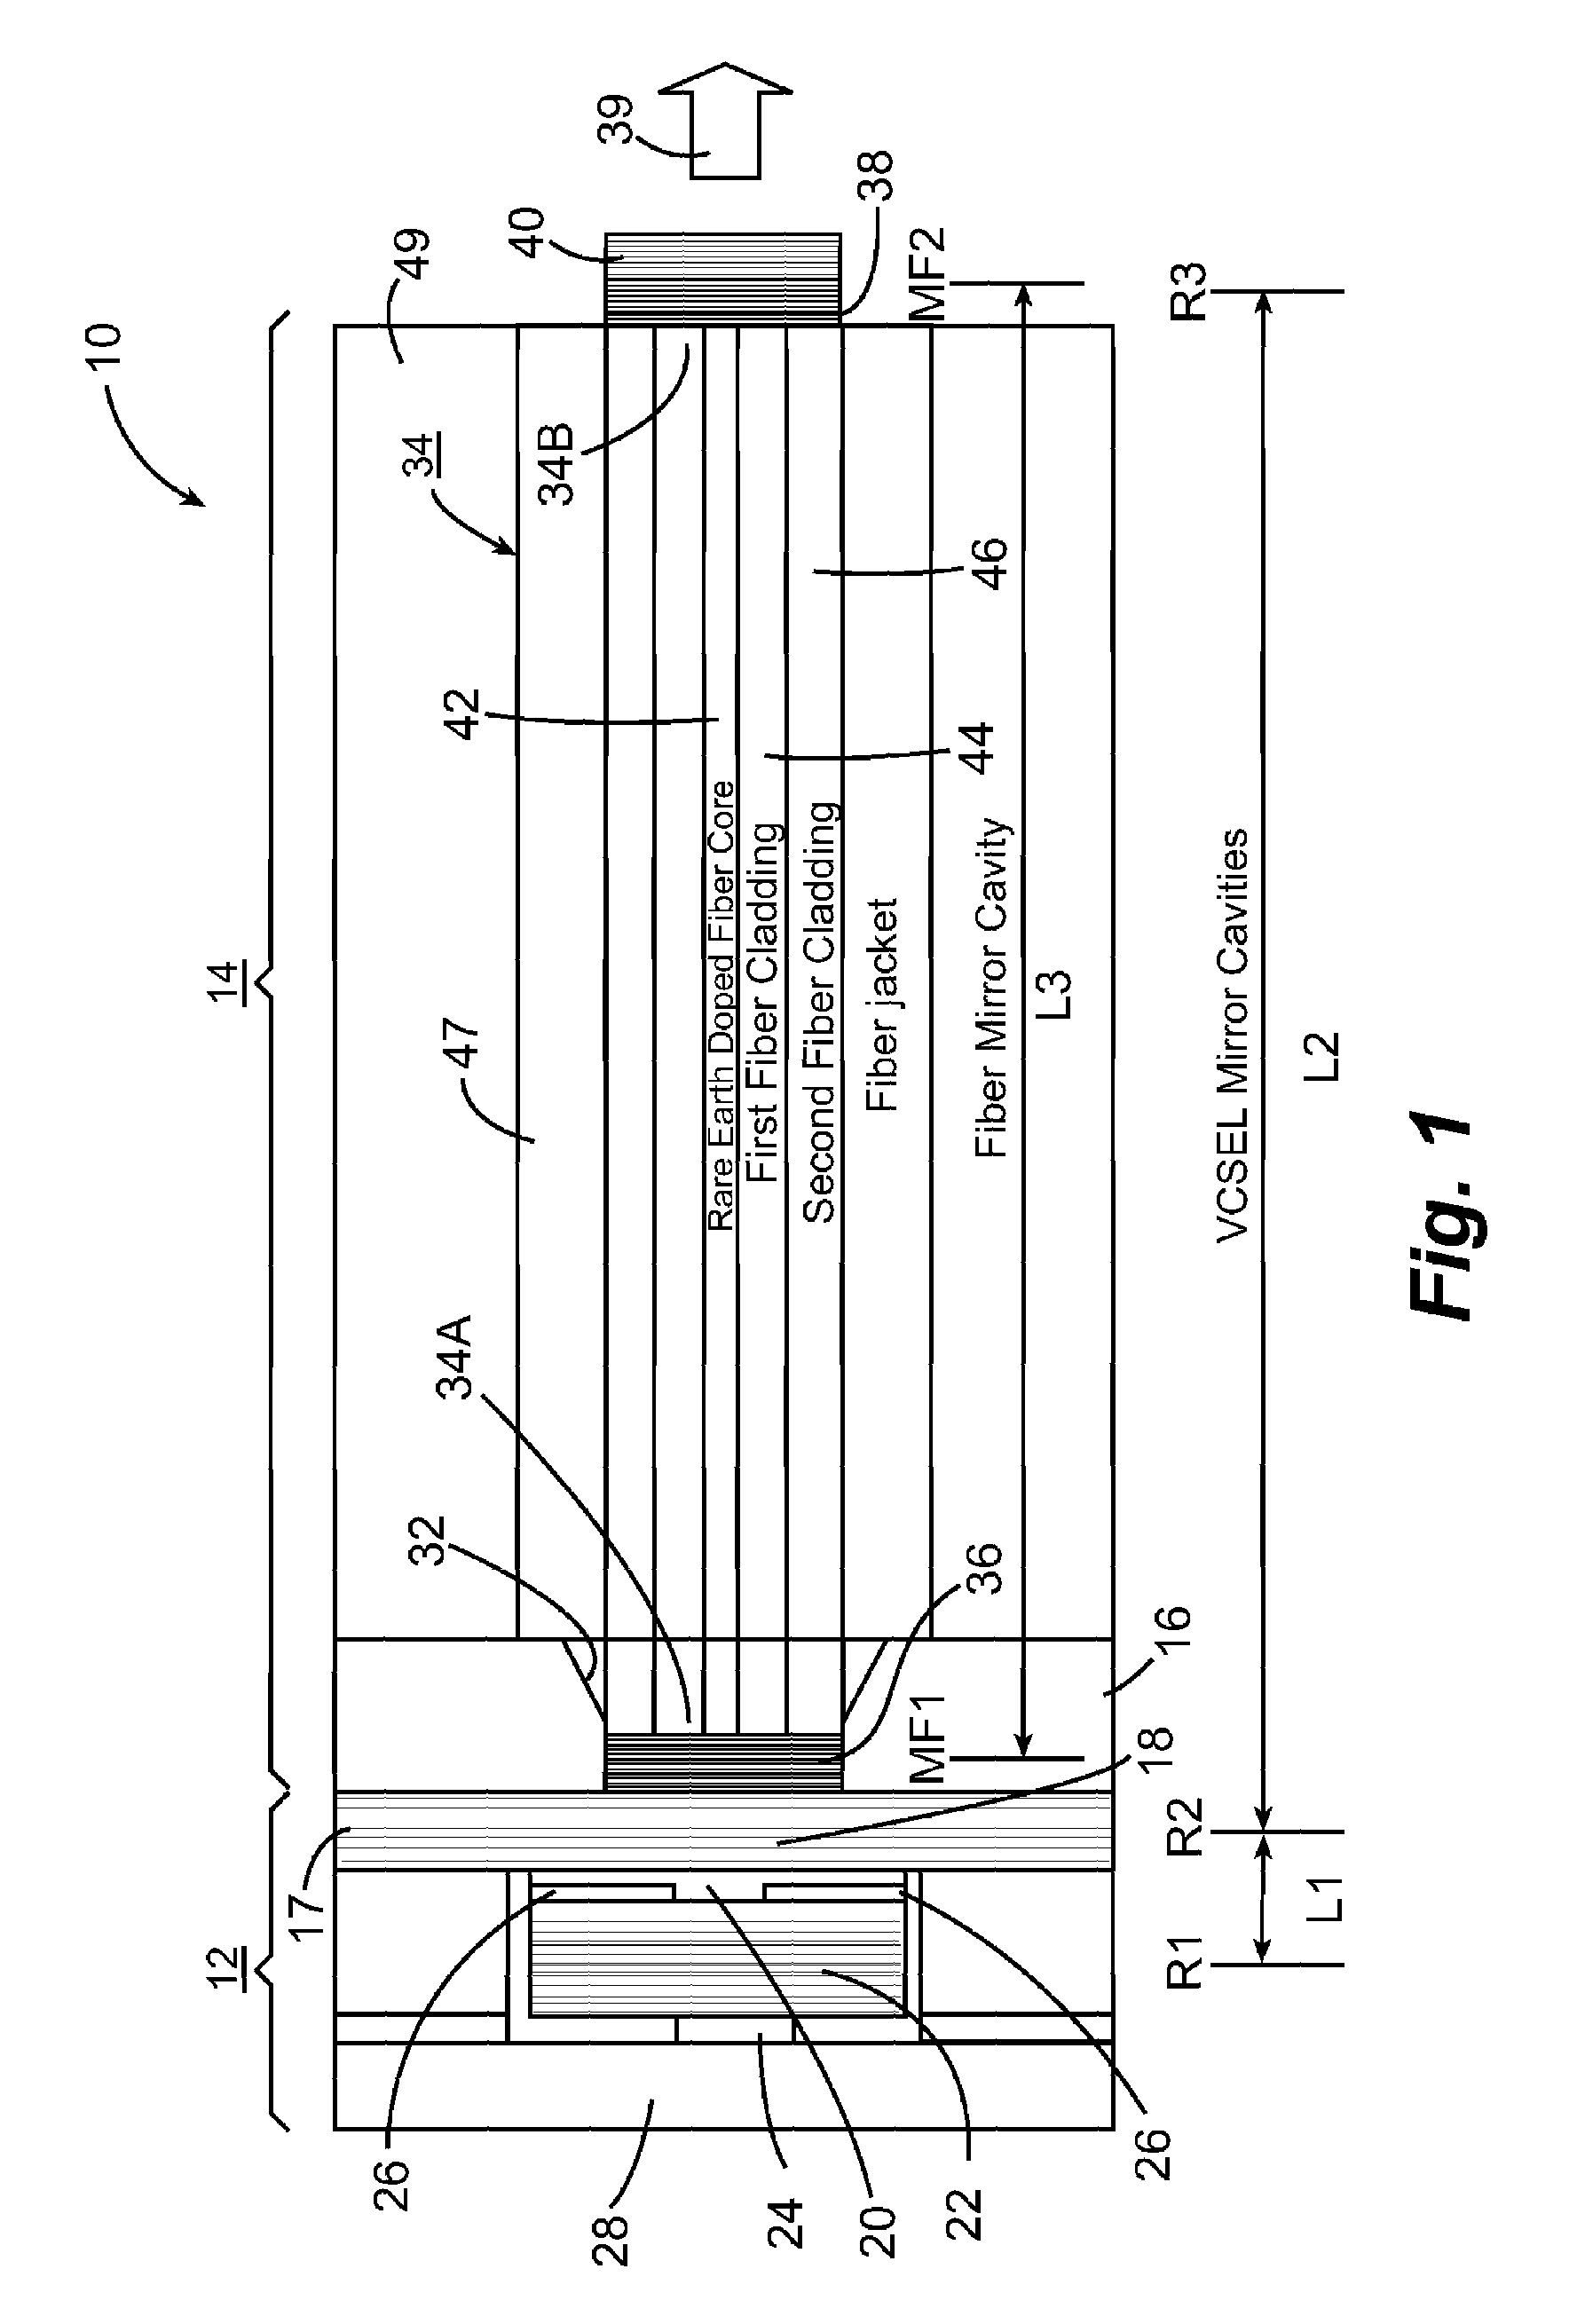 Method for measurement of analyte concentrations and semiconductor laser-pumped, small-cavity fiber lasers for such measurements and other applications